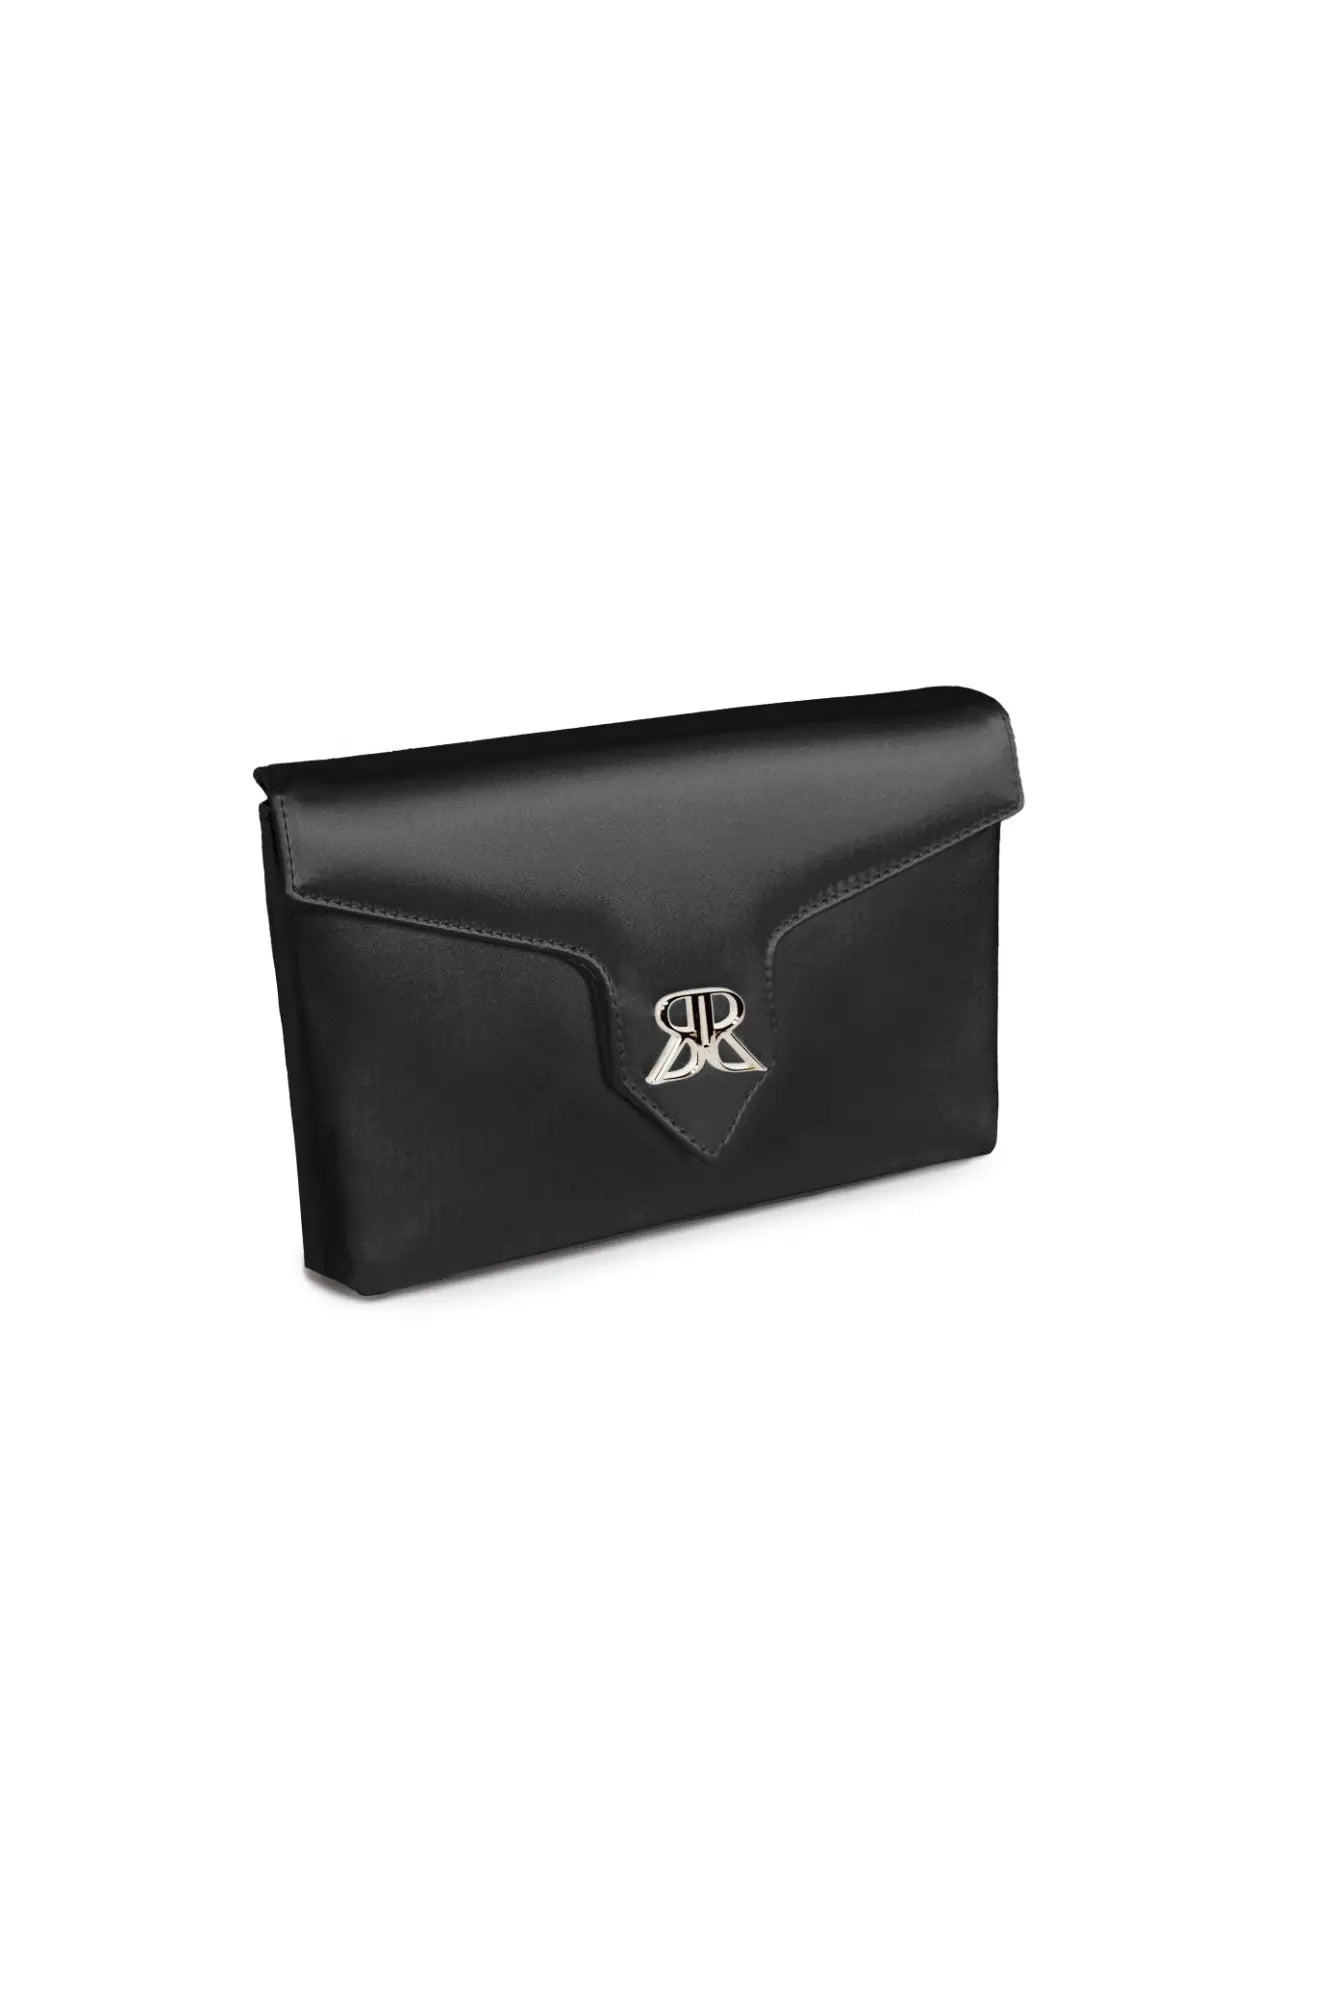 A black Love Note Envelope Clutch Black with a metallic logo clasp on a white background.